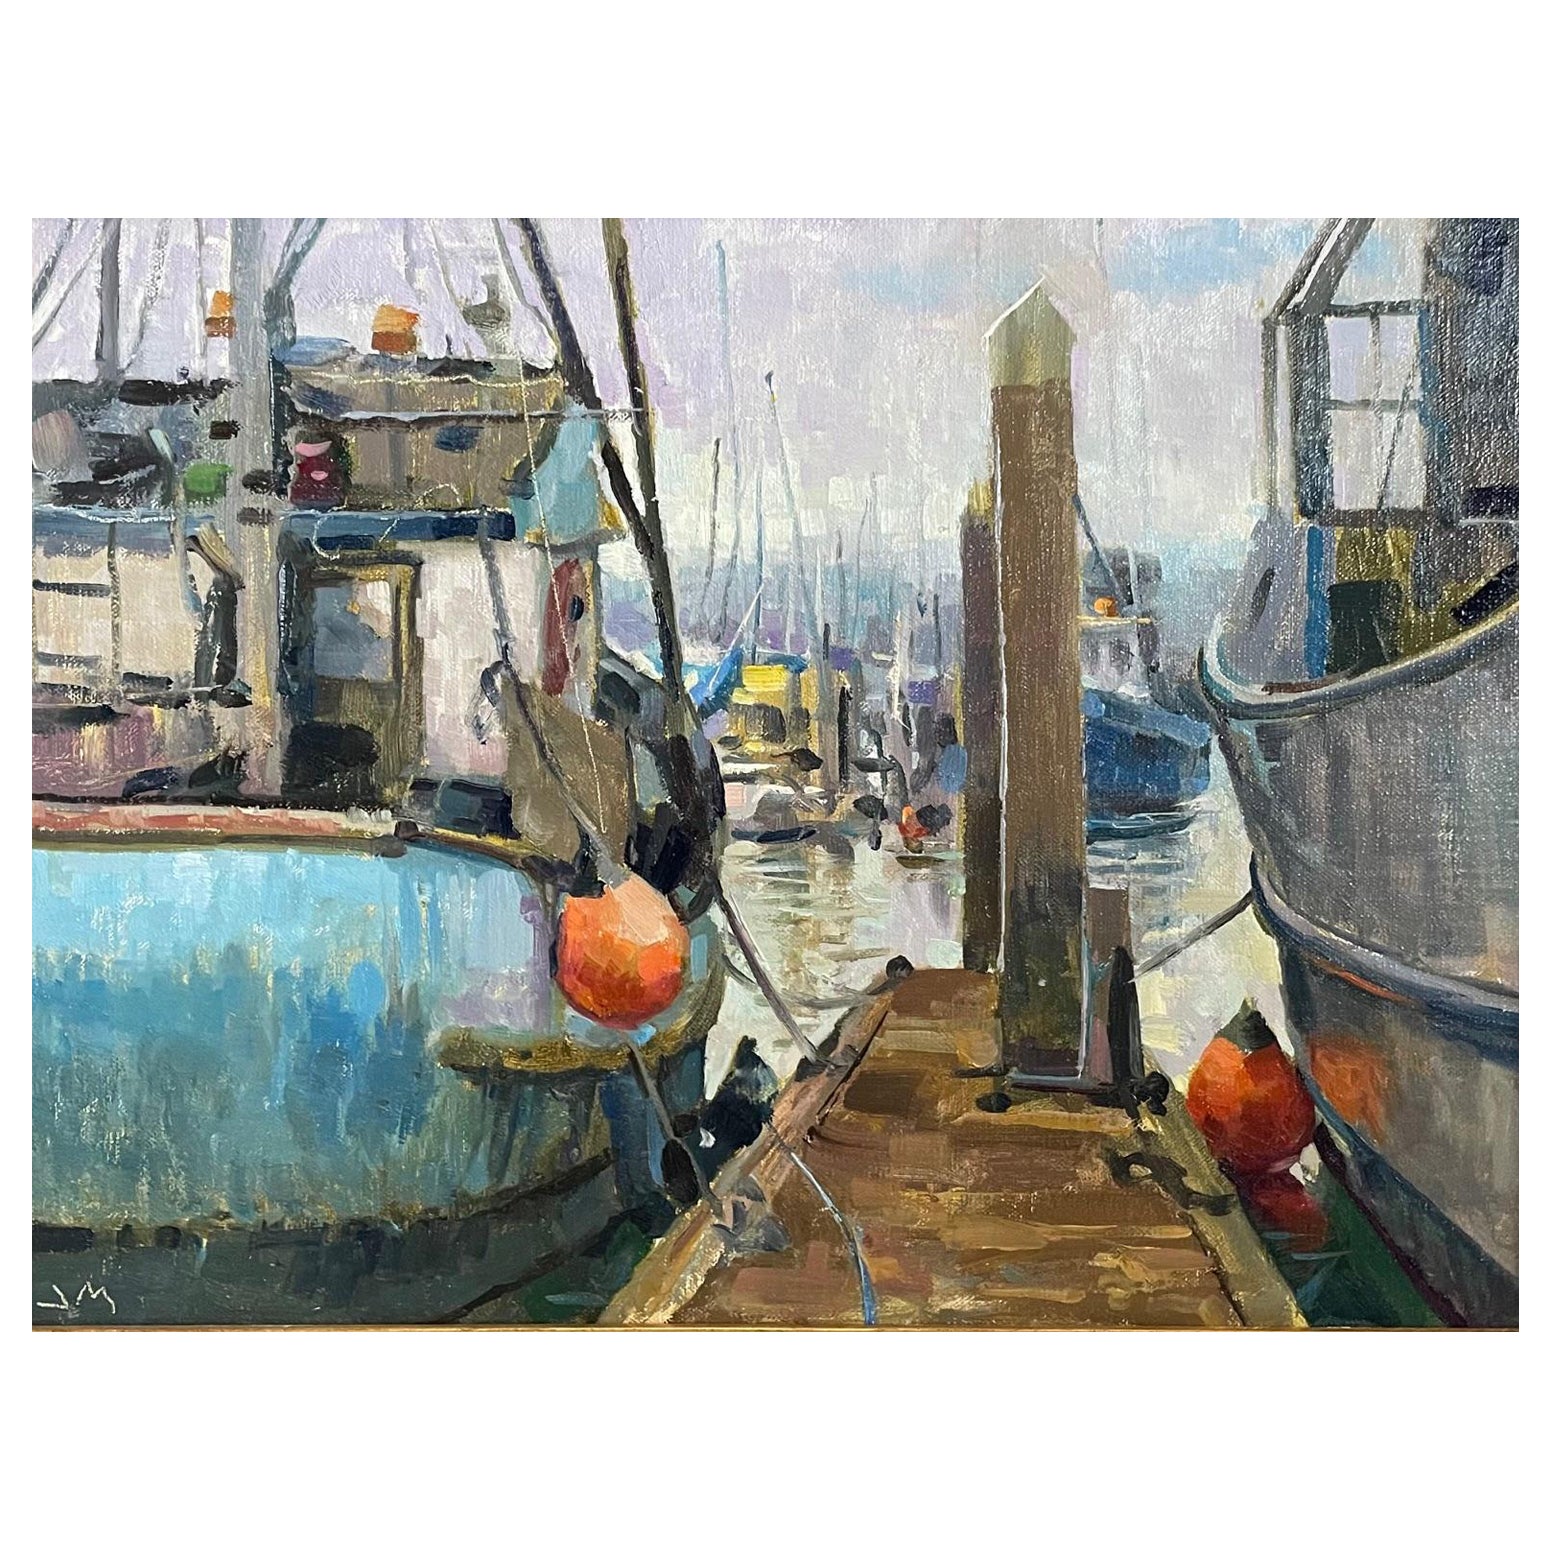 Framed Oil on Canvas "The Space Between" Boat Scene by Jeff Markowsky For Sale